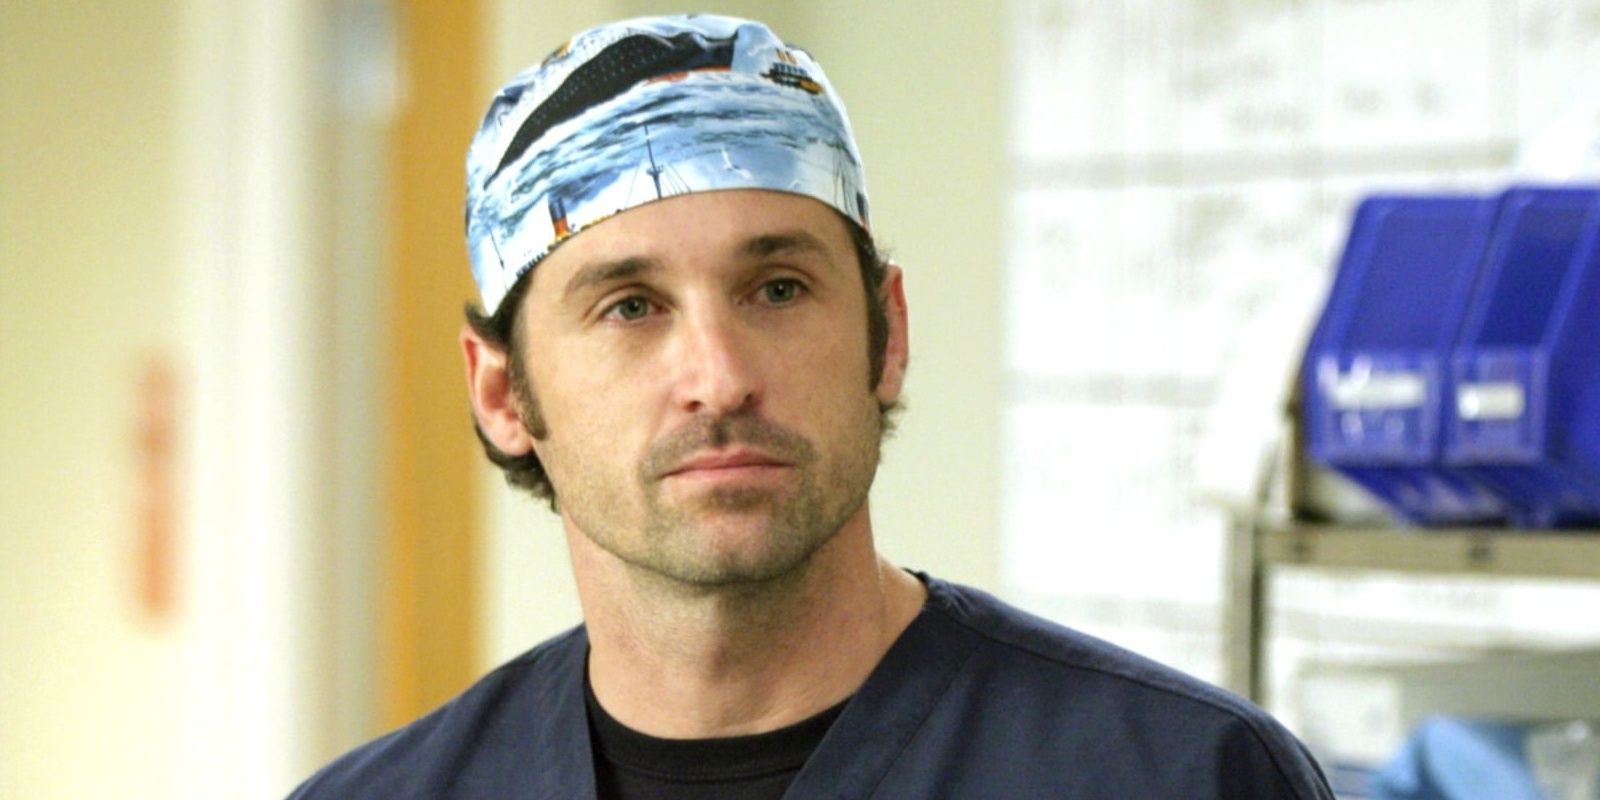 Greys Anatomy 10 Of The Dreamiest Things McDreamy Has Ever Said